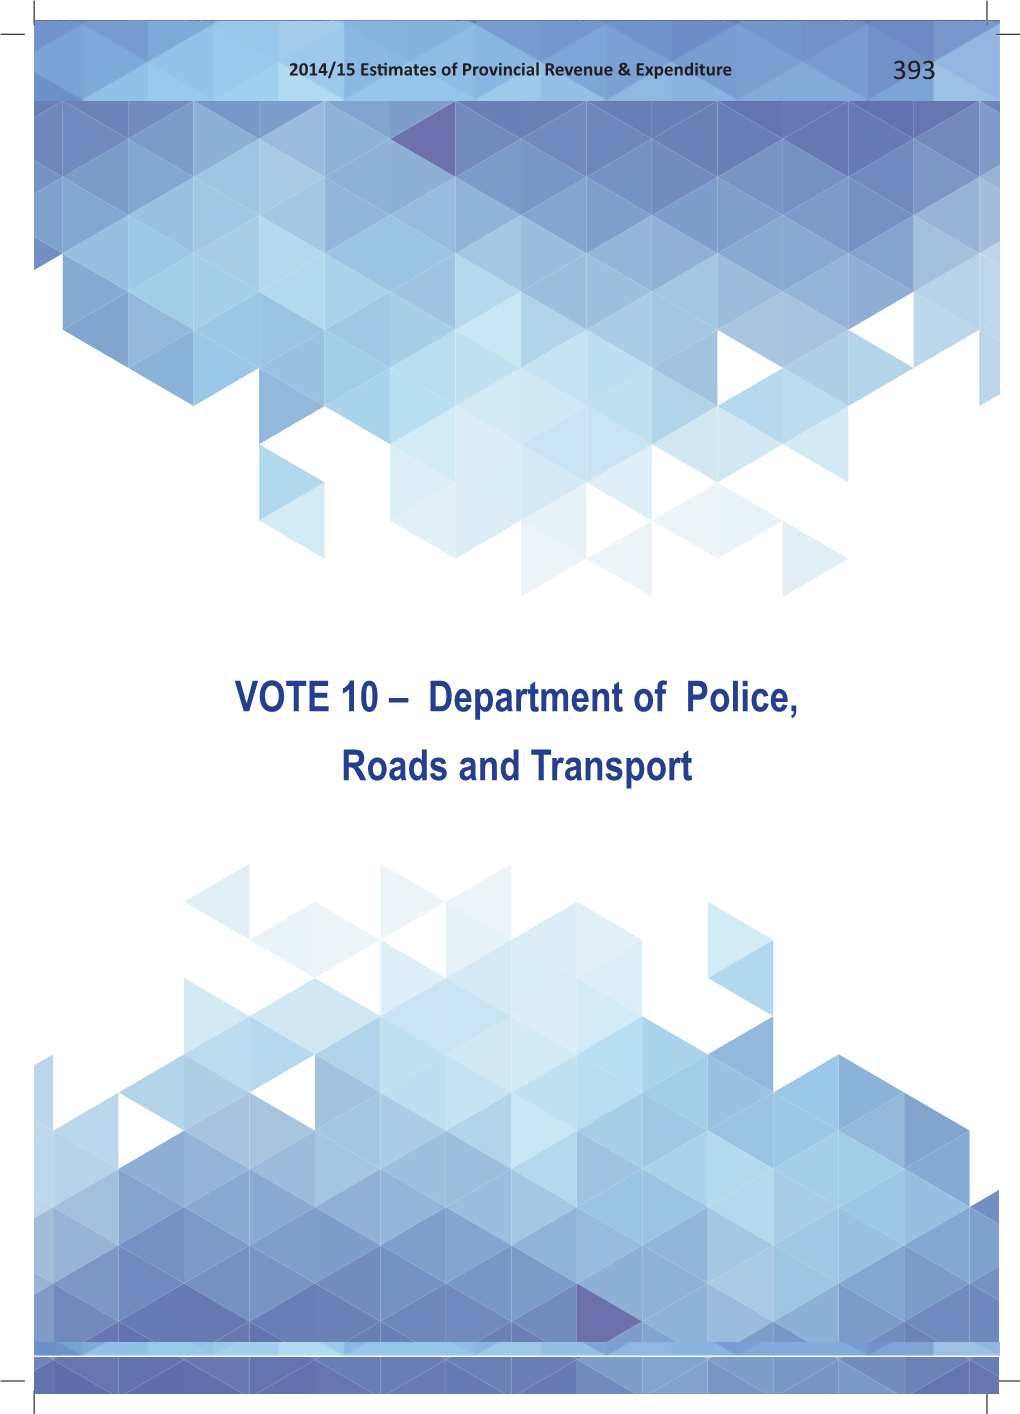 VOTE 10 – Department of Police, Roads and Transport 394 VOTE 10 – Department of Police, Roads and Transport